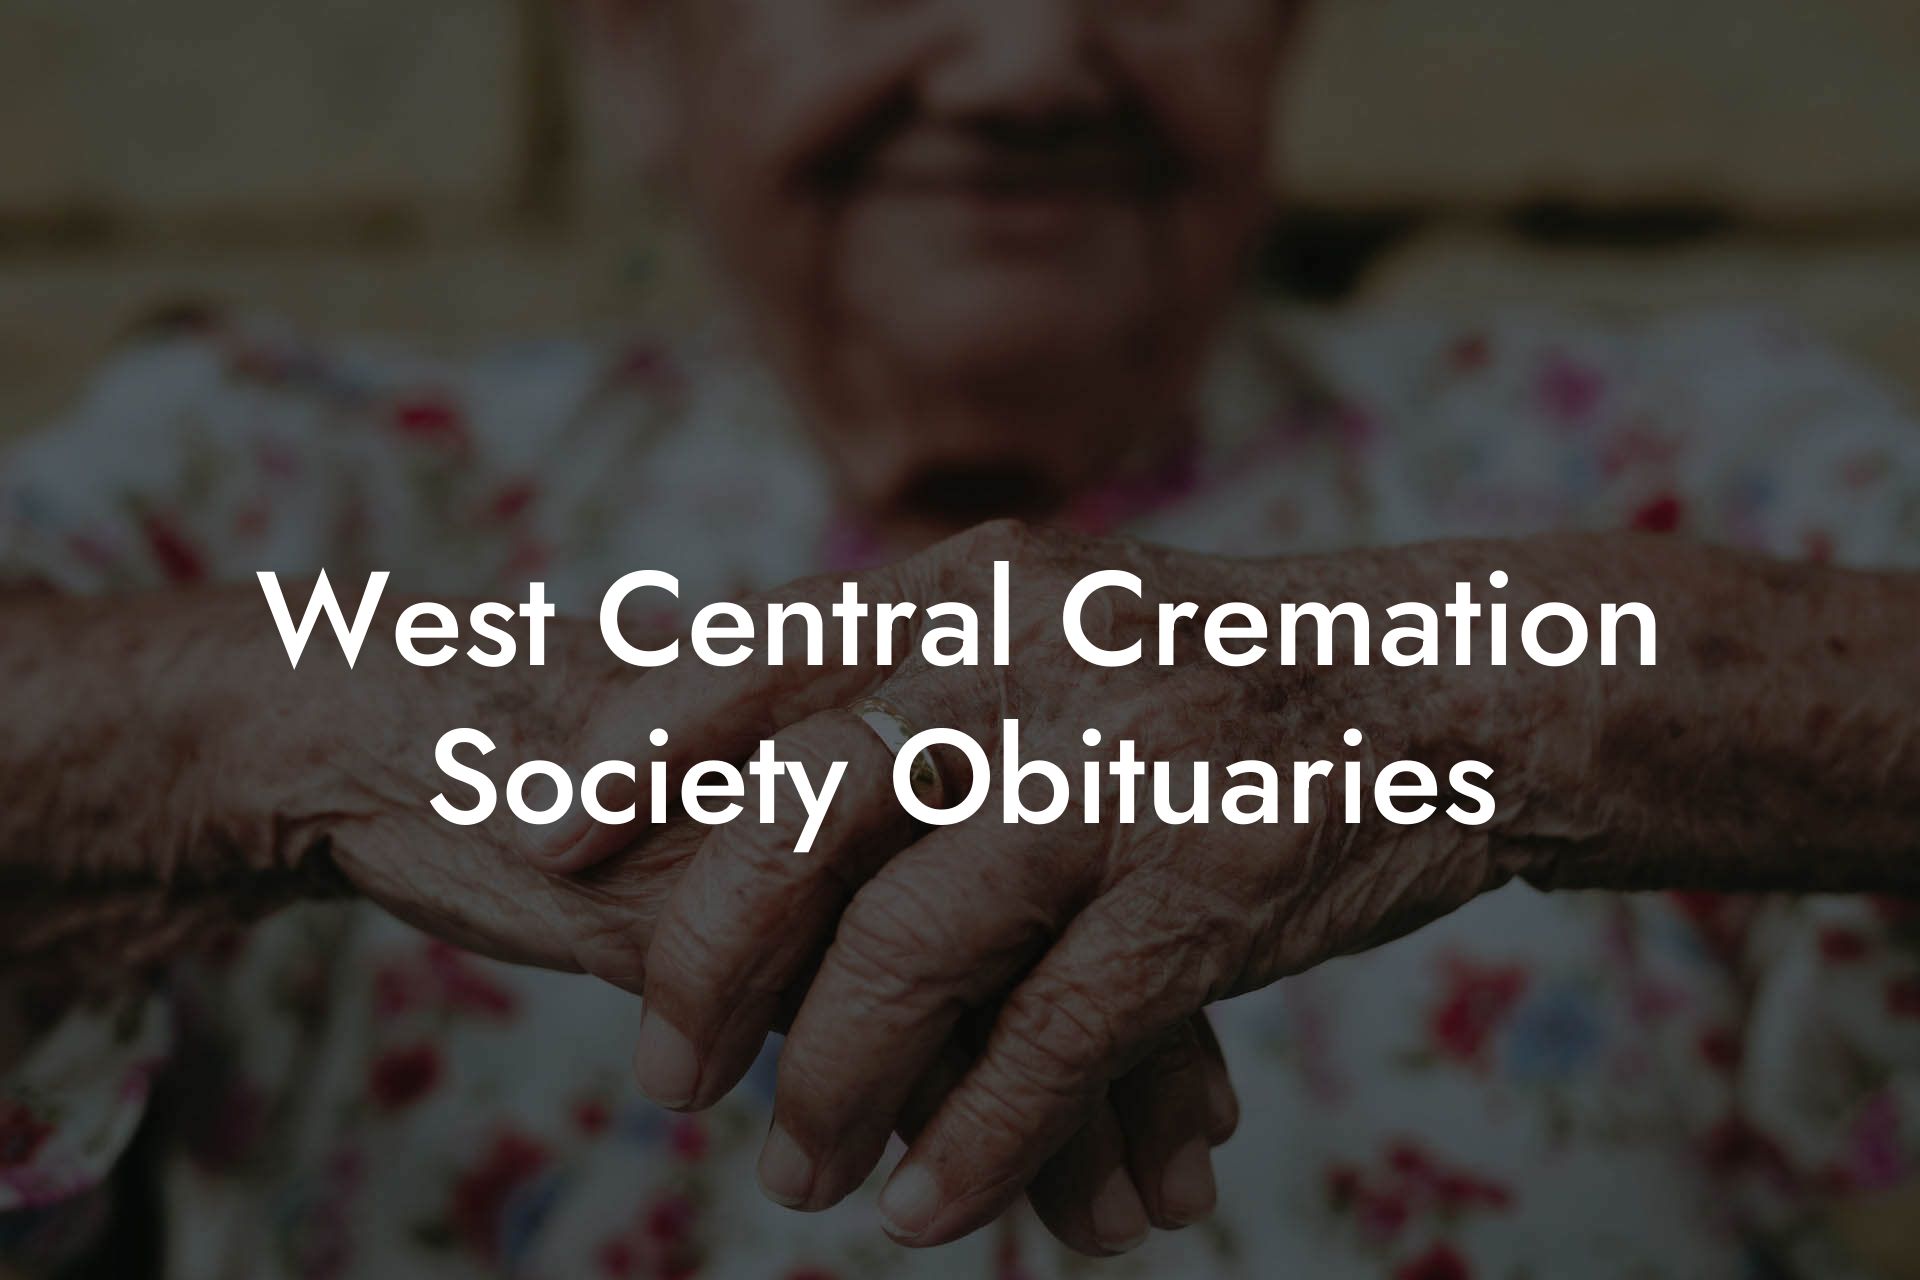 West Central Cremation Society Obituaries